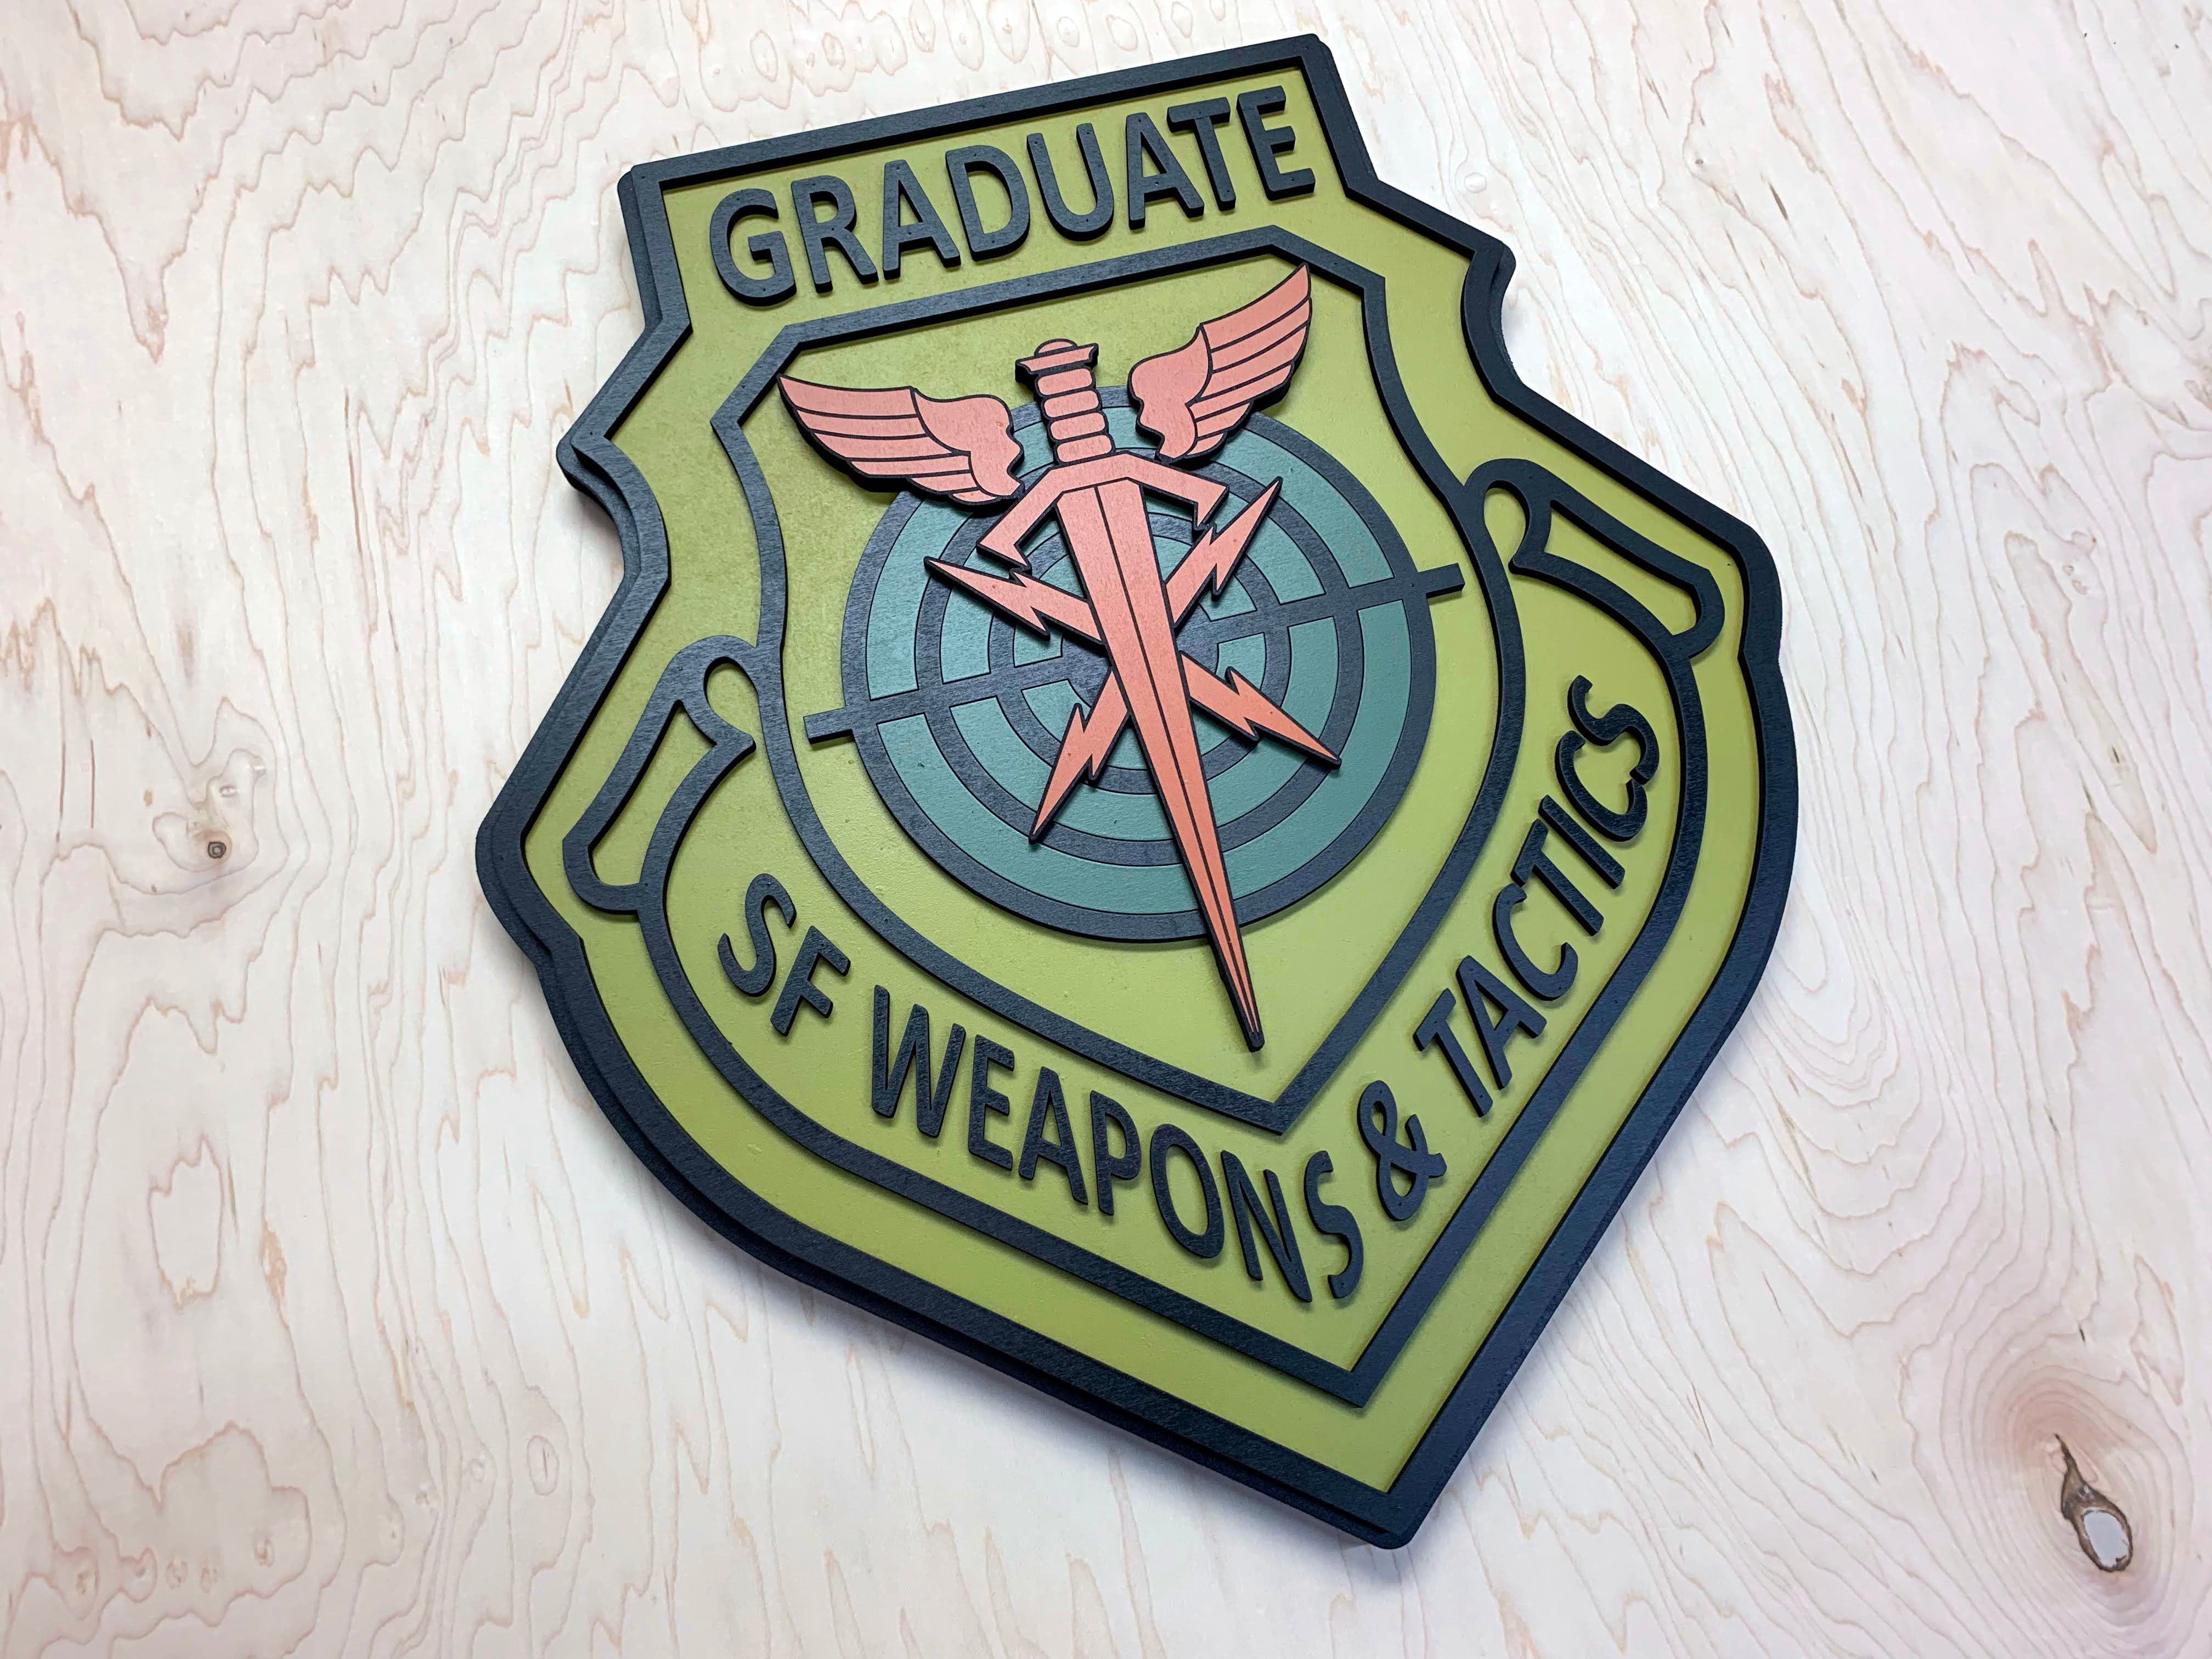 USAF Security Forces Weapons Tactics Graduate Wooden Patch by Patriot Wood